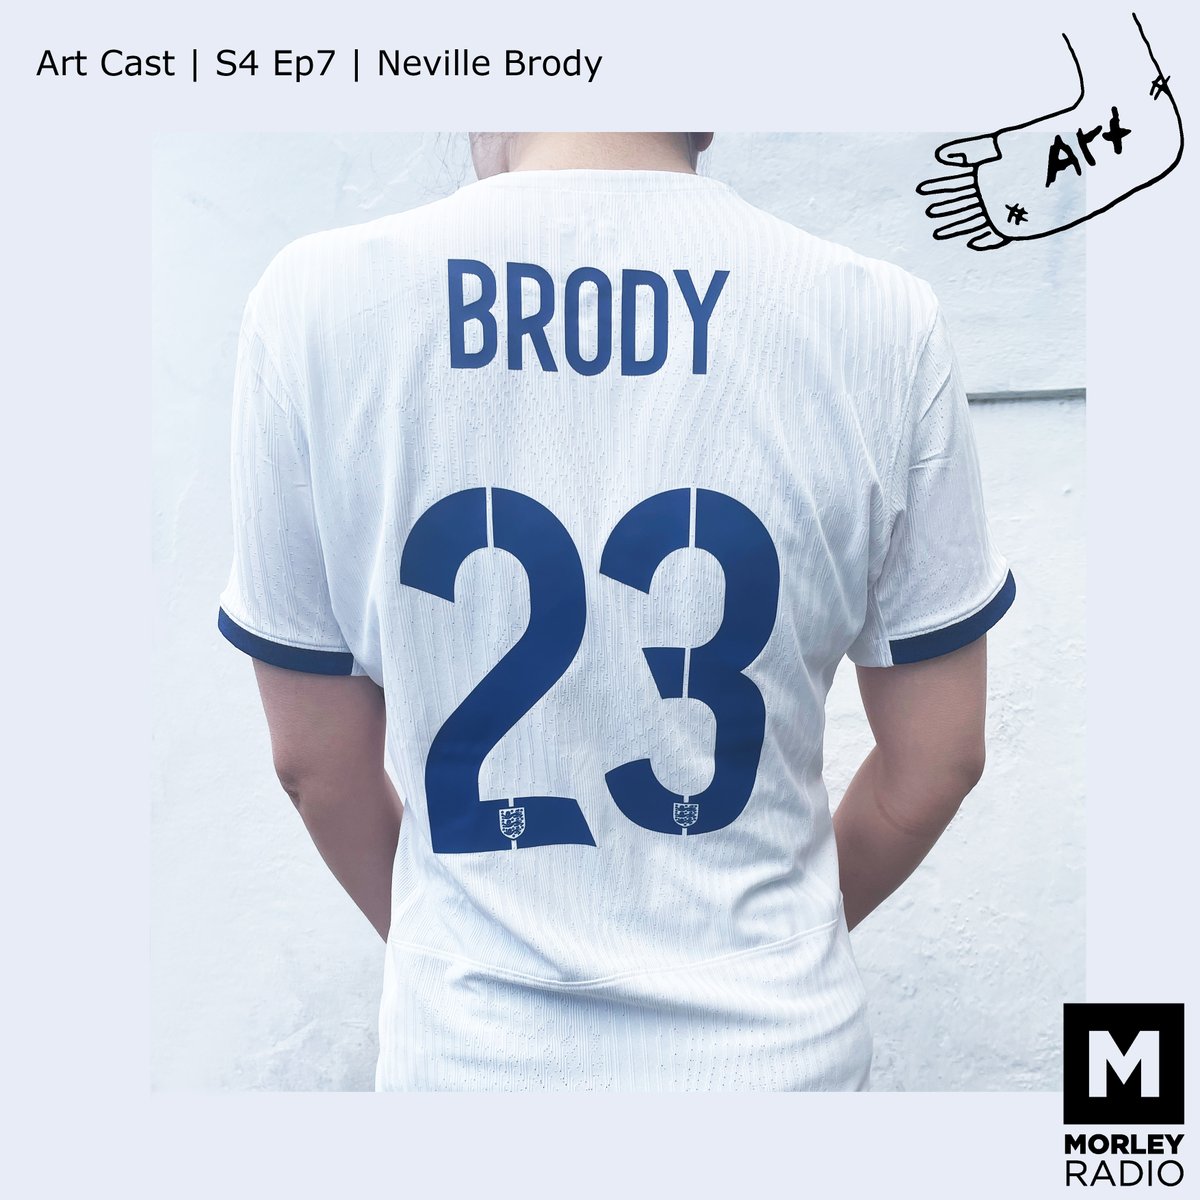 ART CAST | S4 Ep7 | Neville Brody For this episode, Matt Gee, Chelsea's Programme Area Manager of Fine Art, was joined by Neville Brody for a chat following his #PennyLecture here at #MorleyCollegeLondon. Listen on @MorleyRadio - ow.ly/voyV50Ri7FO #GraphicDesign